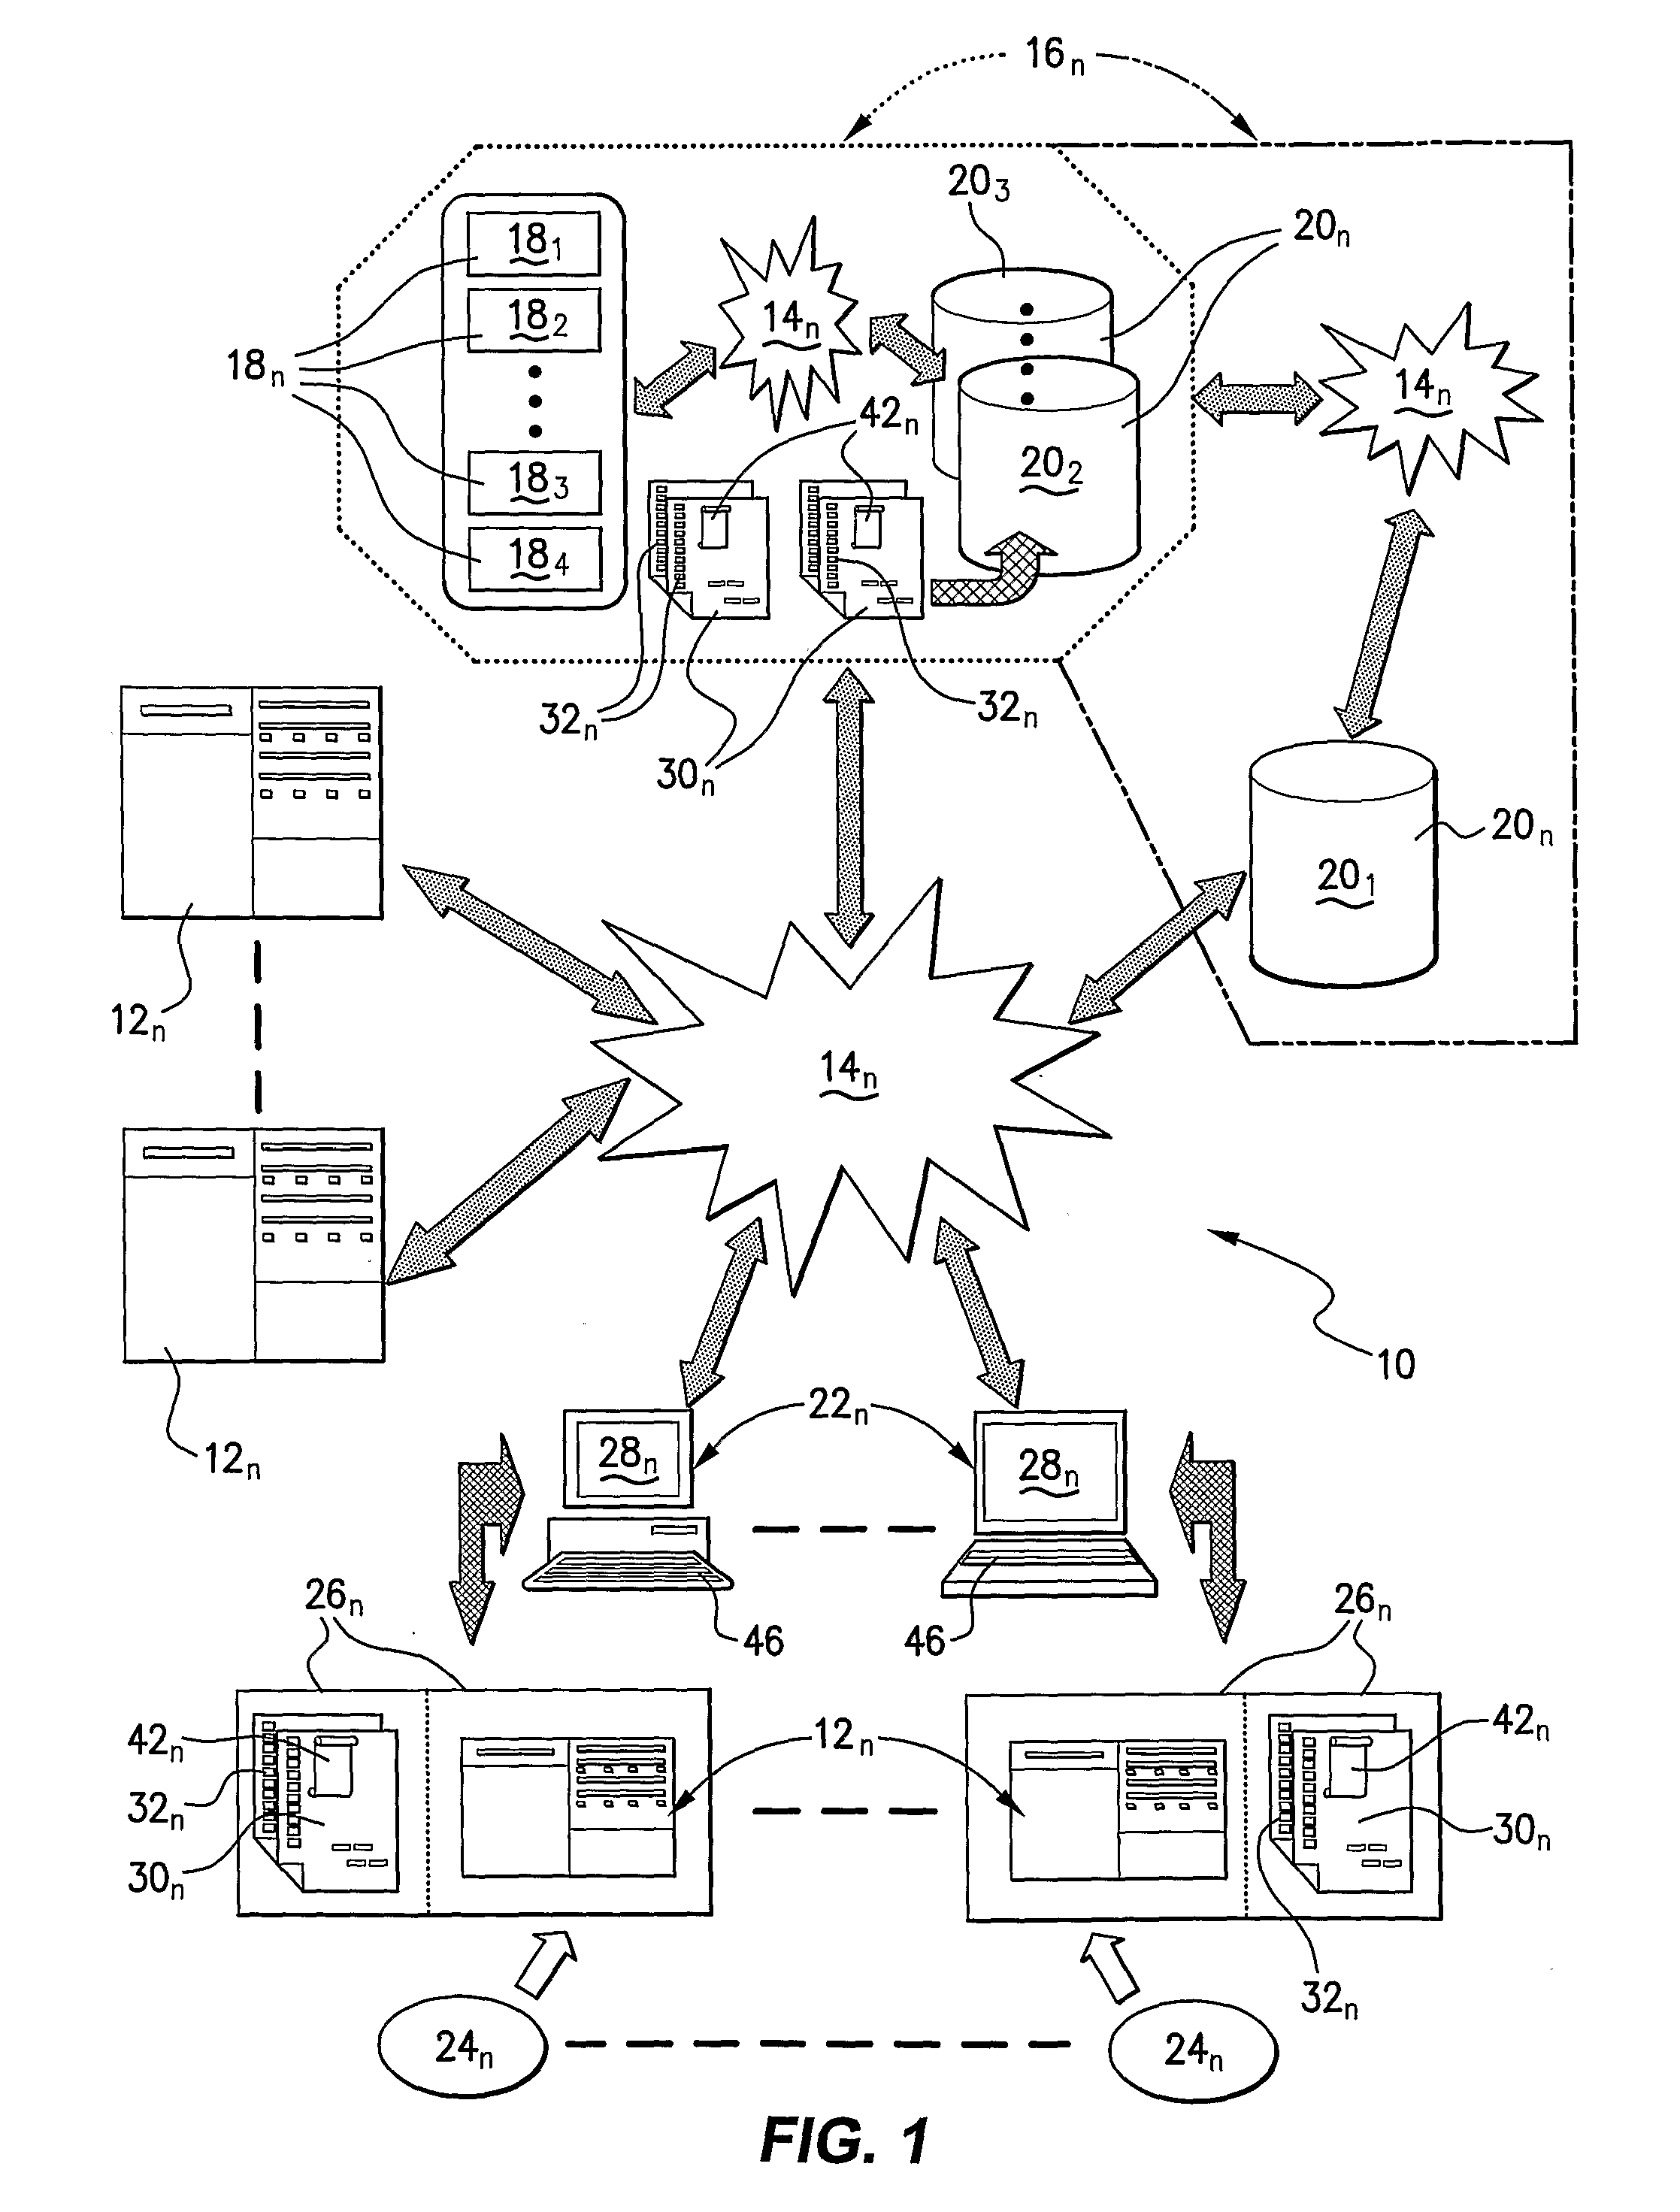 System and Method for Evaluating Network Content